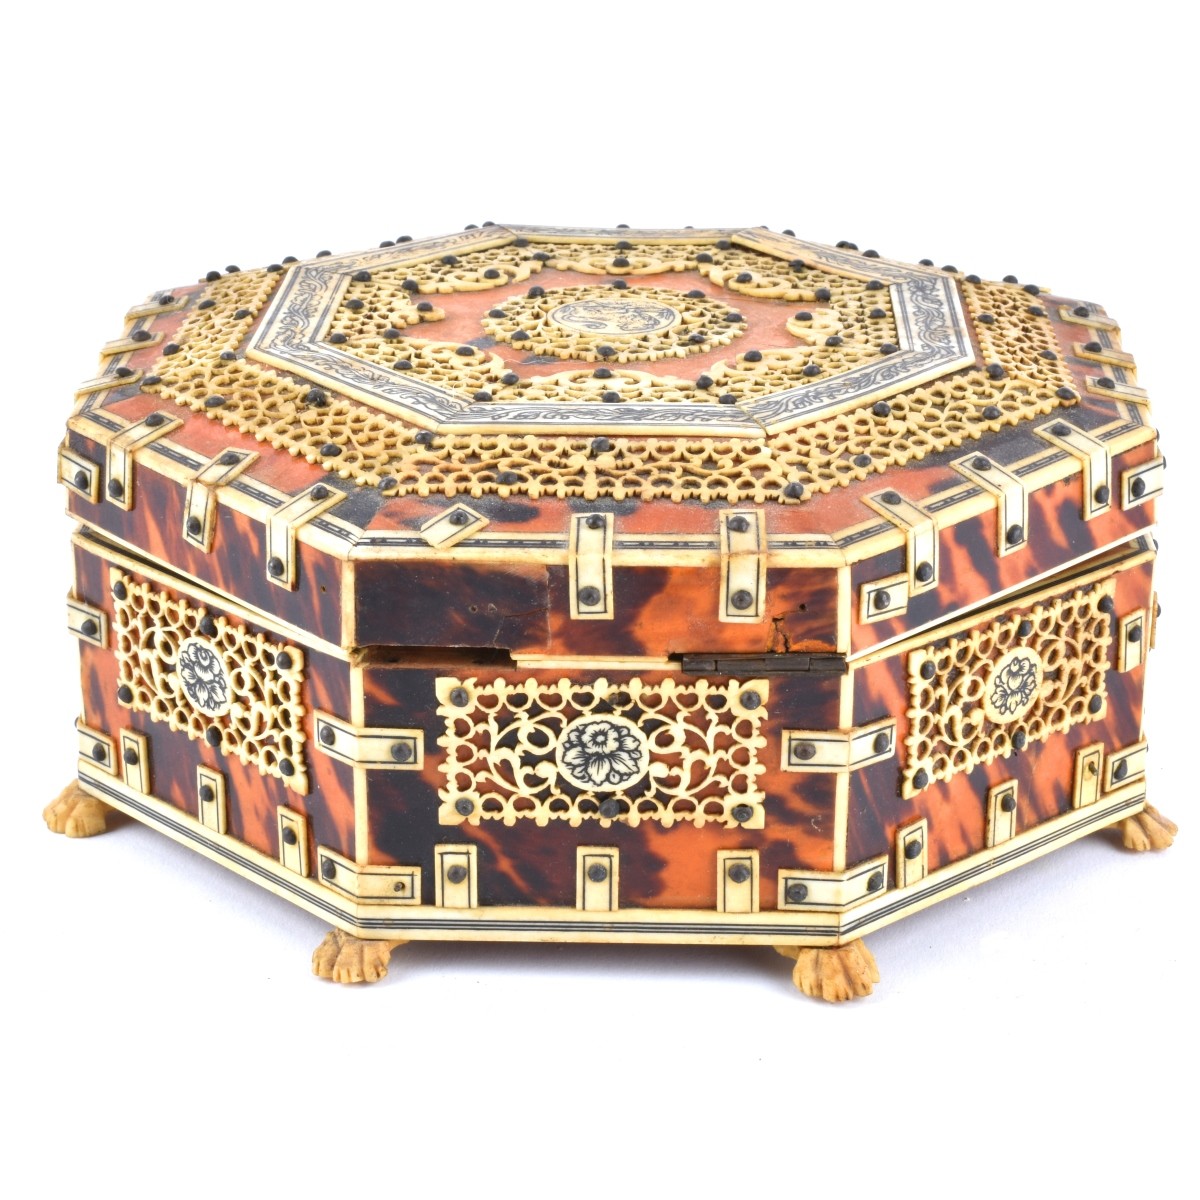 19th C. Anglo-Indian Box